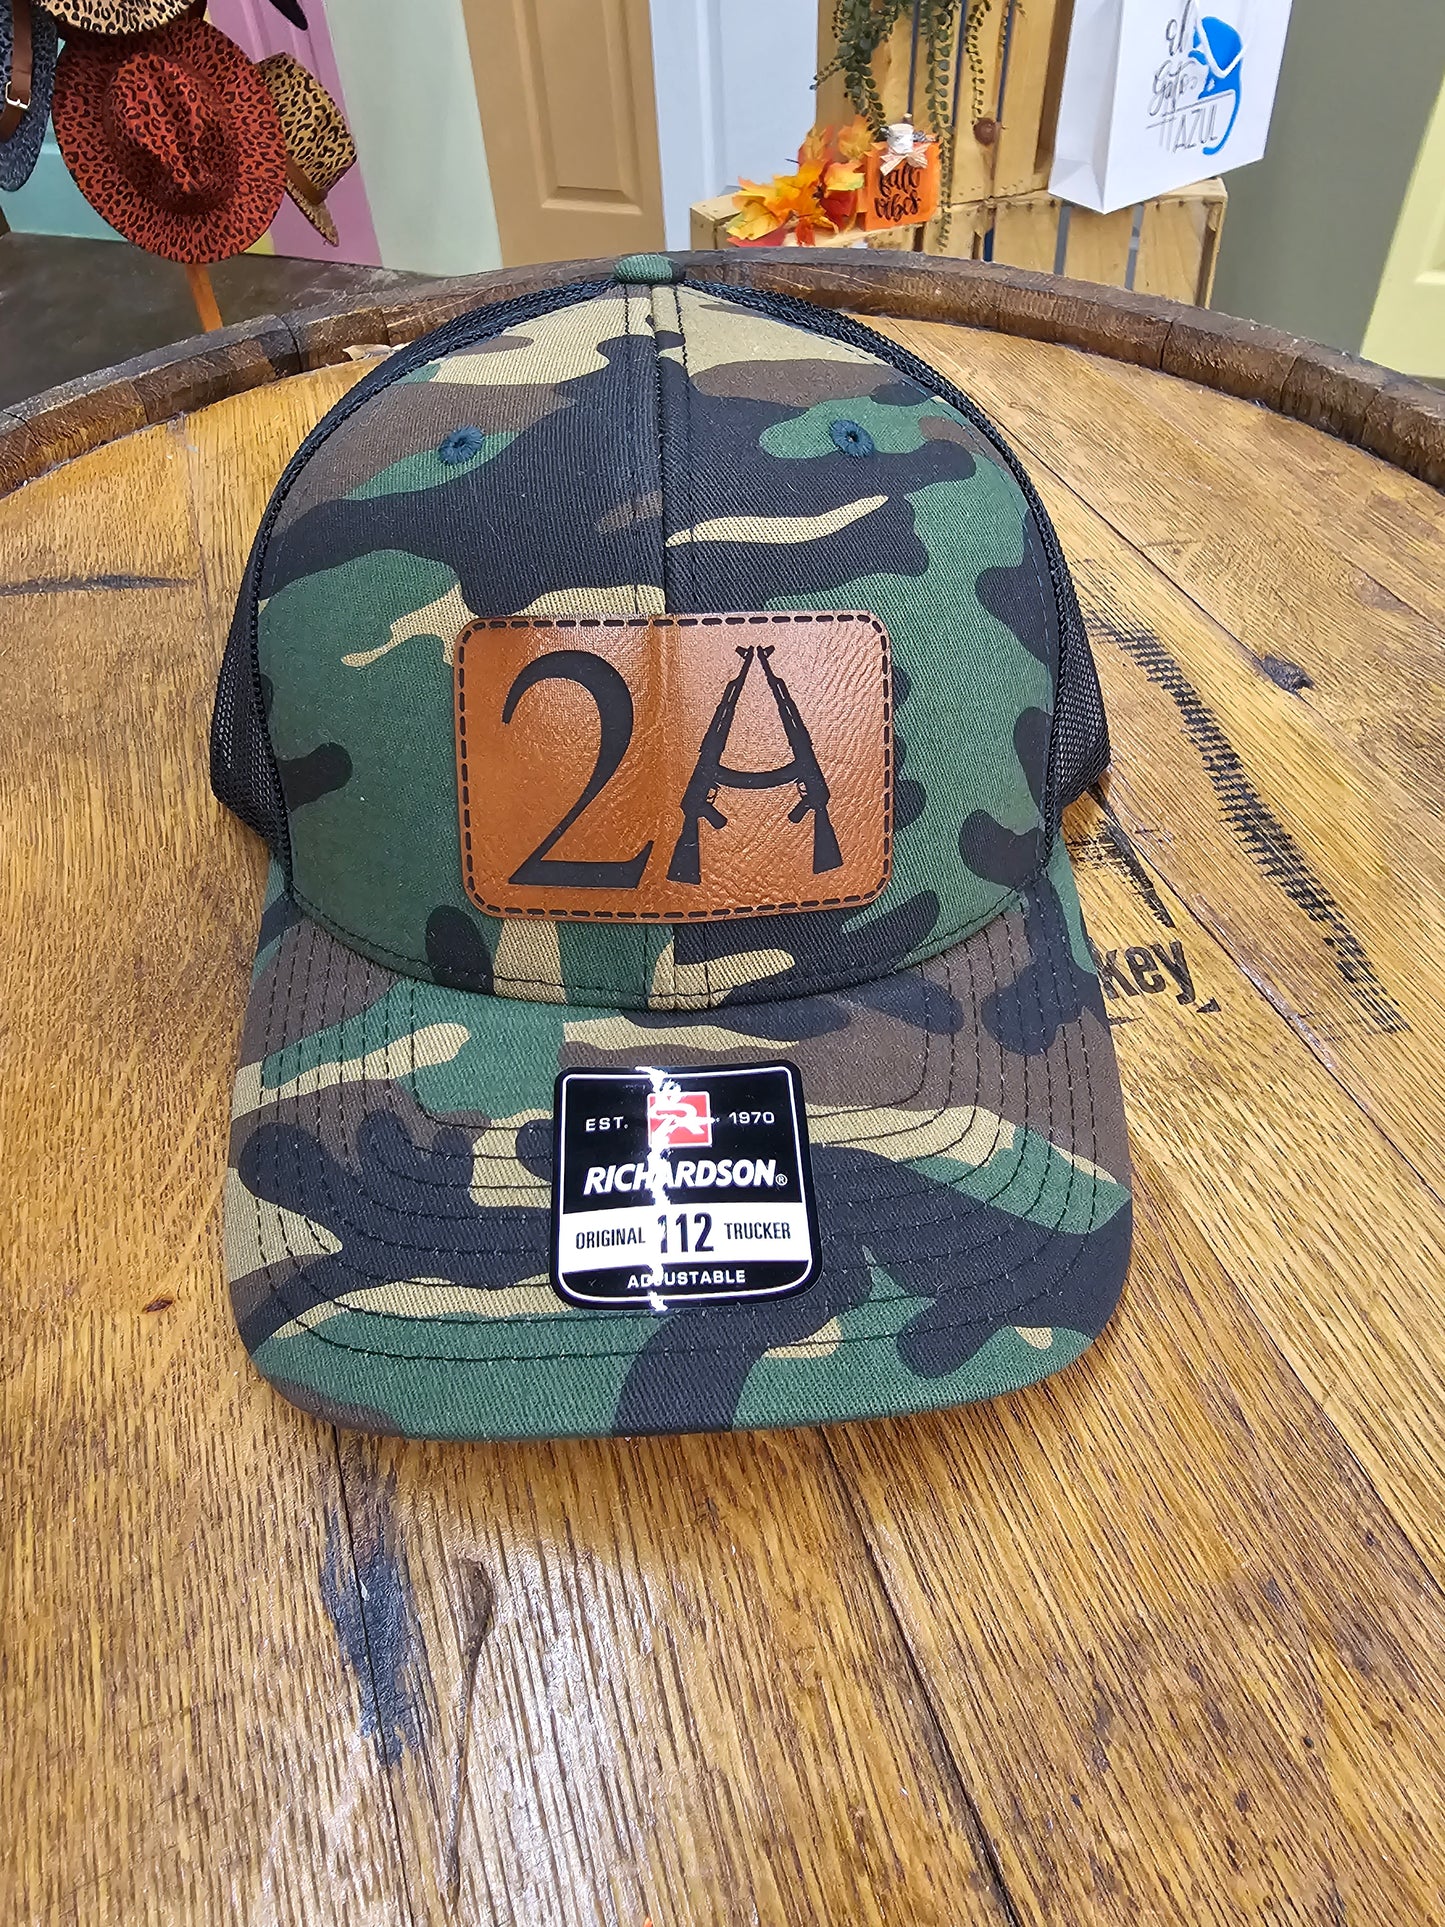 2A Leather Patch Hats